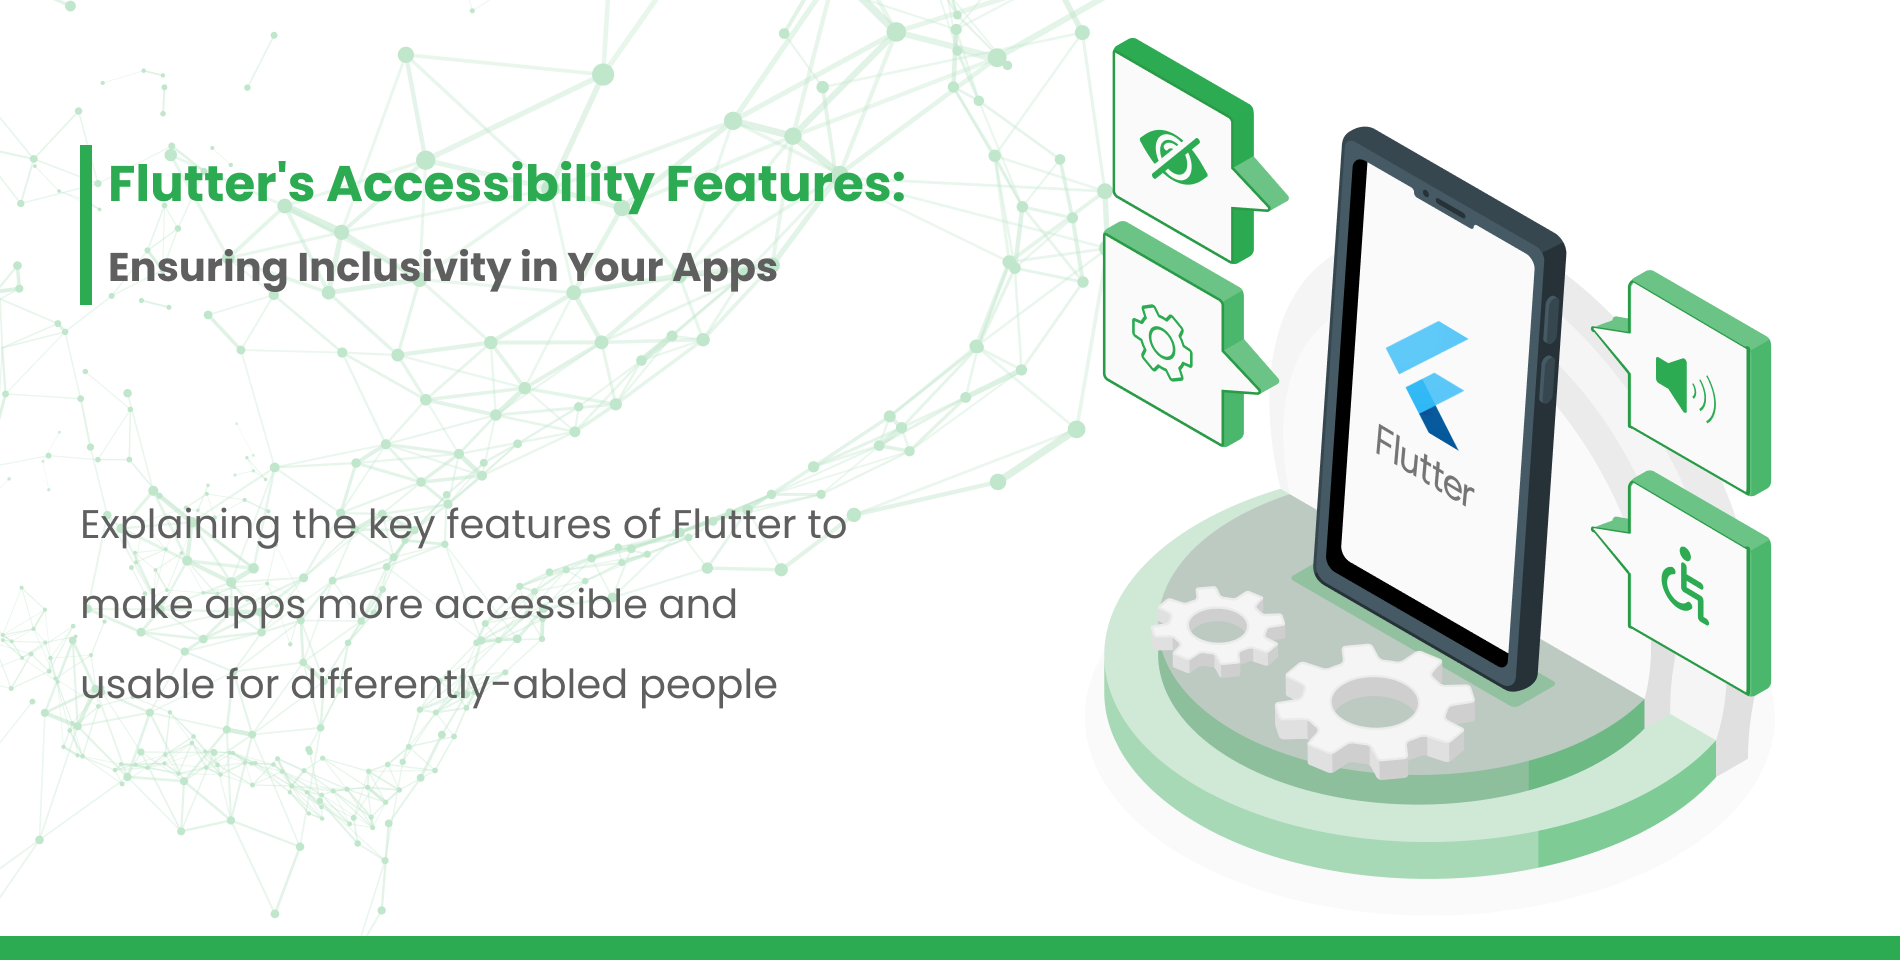 Flutter's Accessibility Features: Ensuring Inclusivity in Your